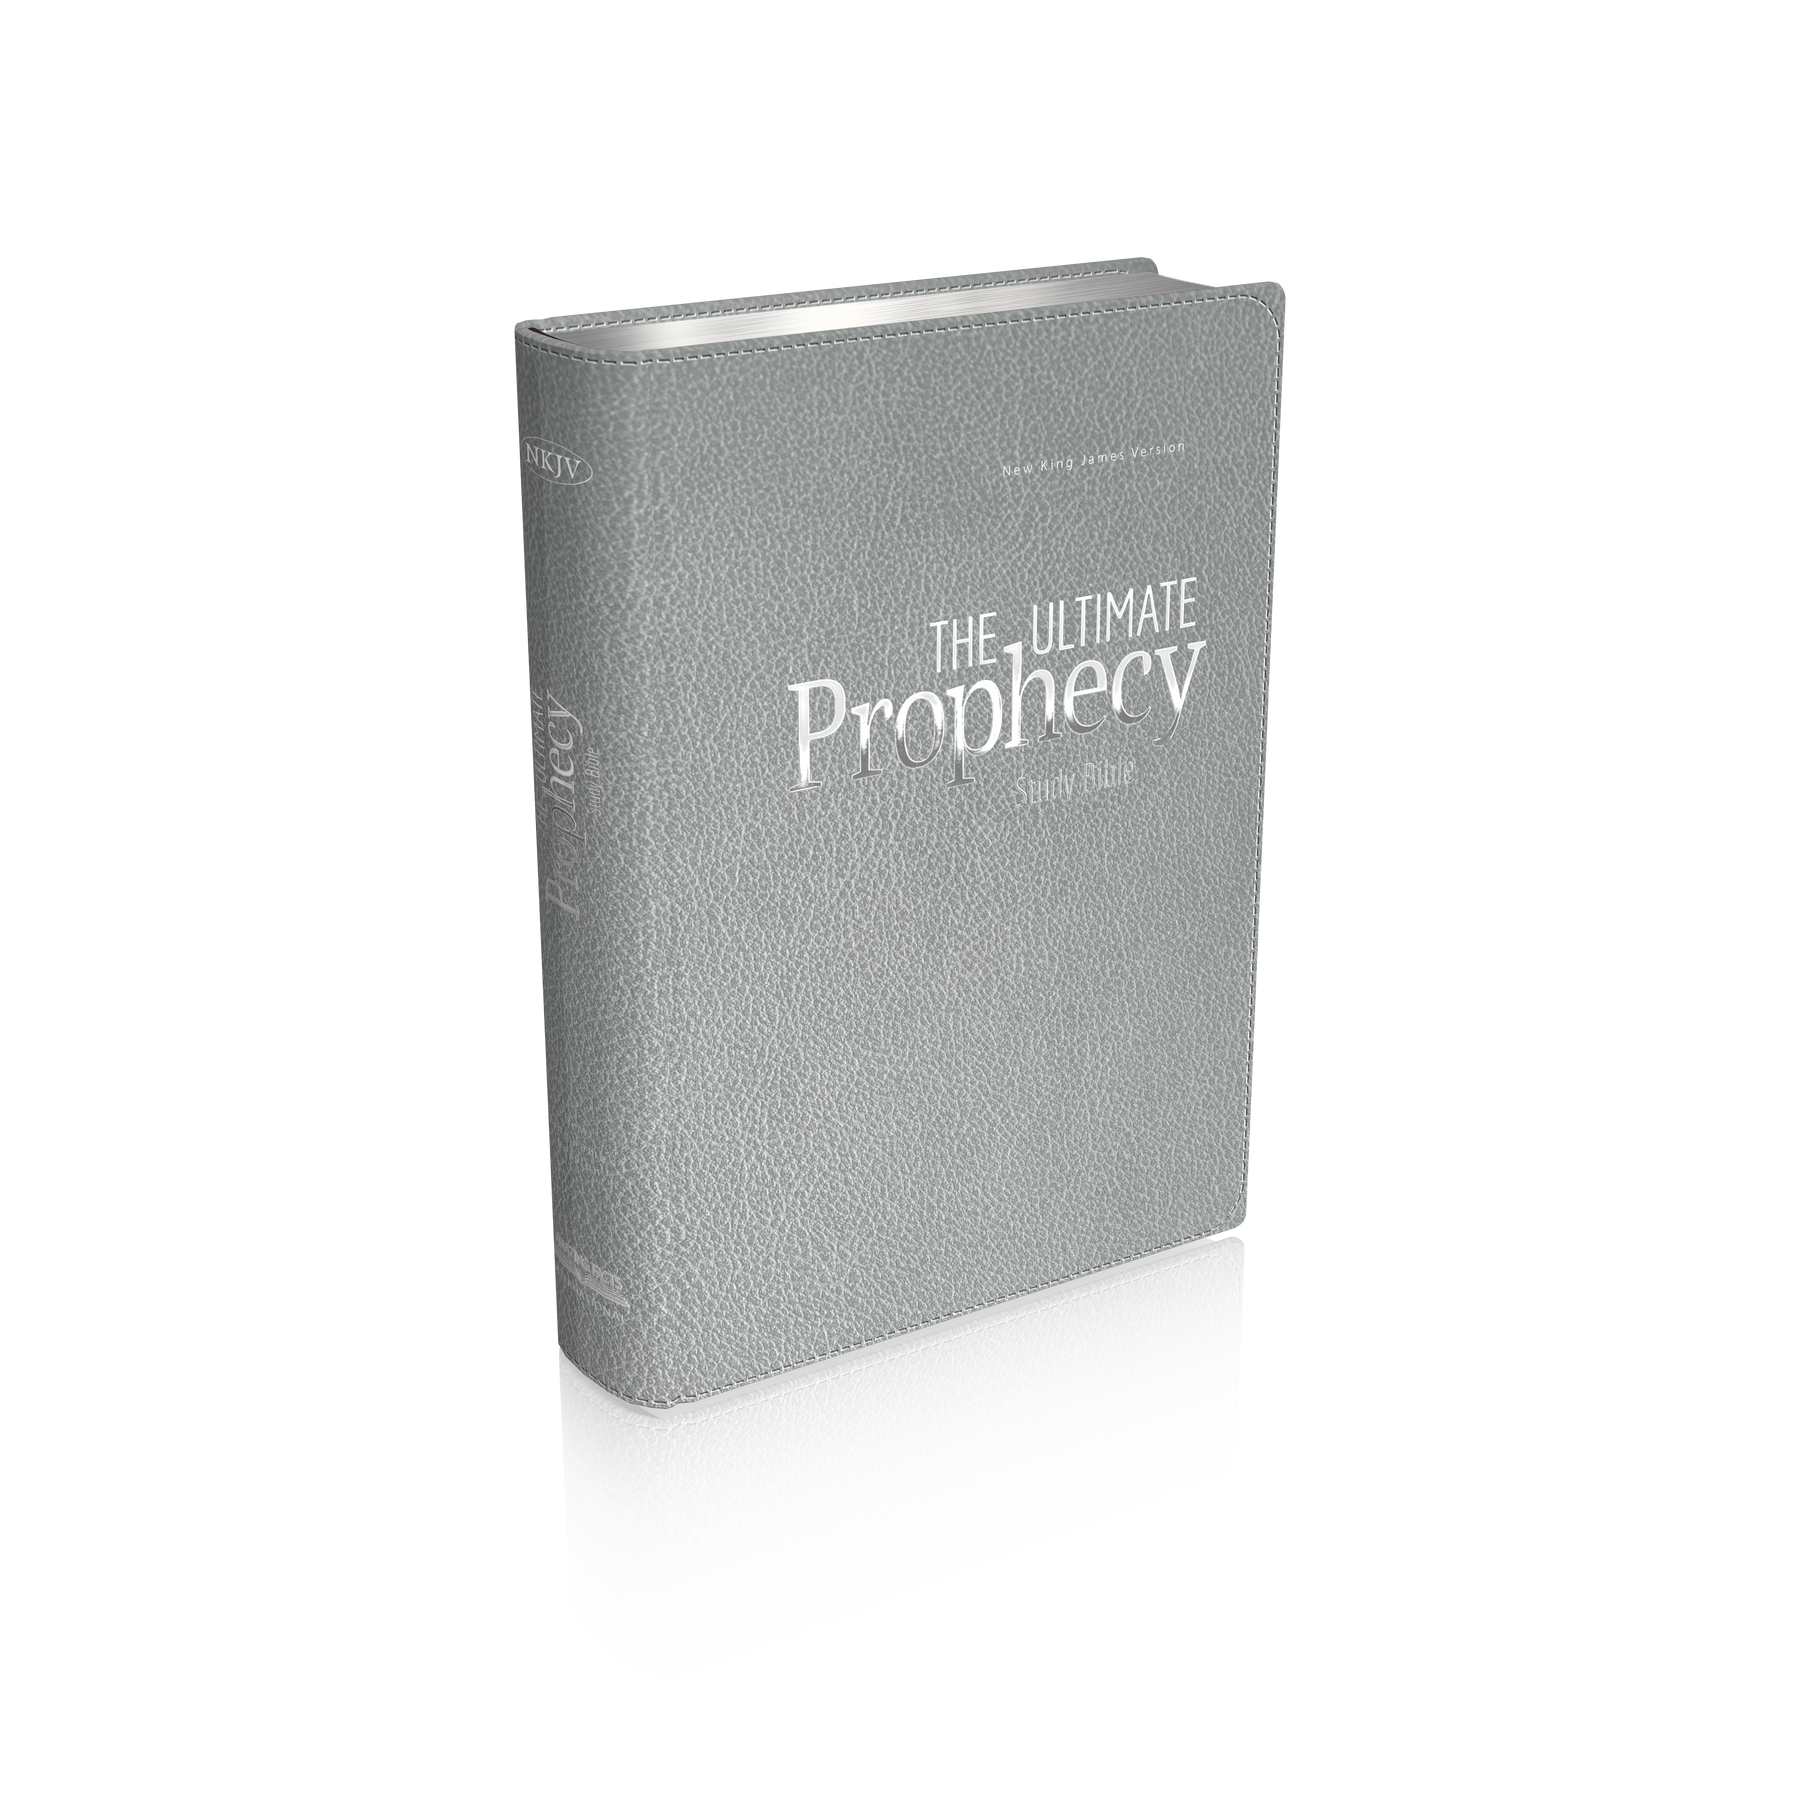 Pre-Order Now! The Ultimate Prophecy Study Bible - Gray Leather by Amazing Facts